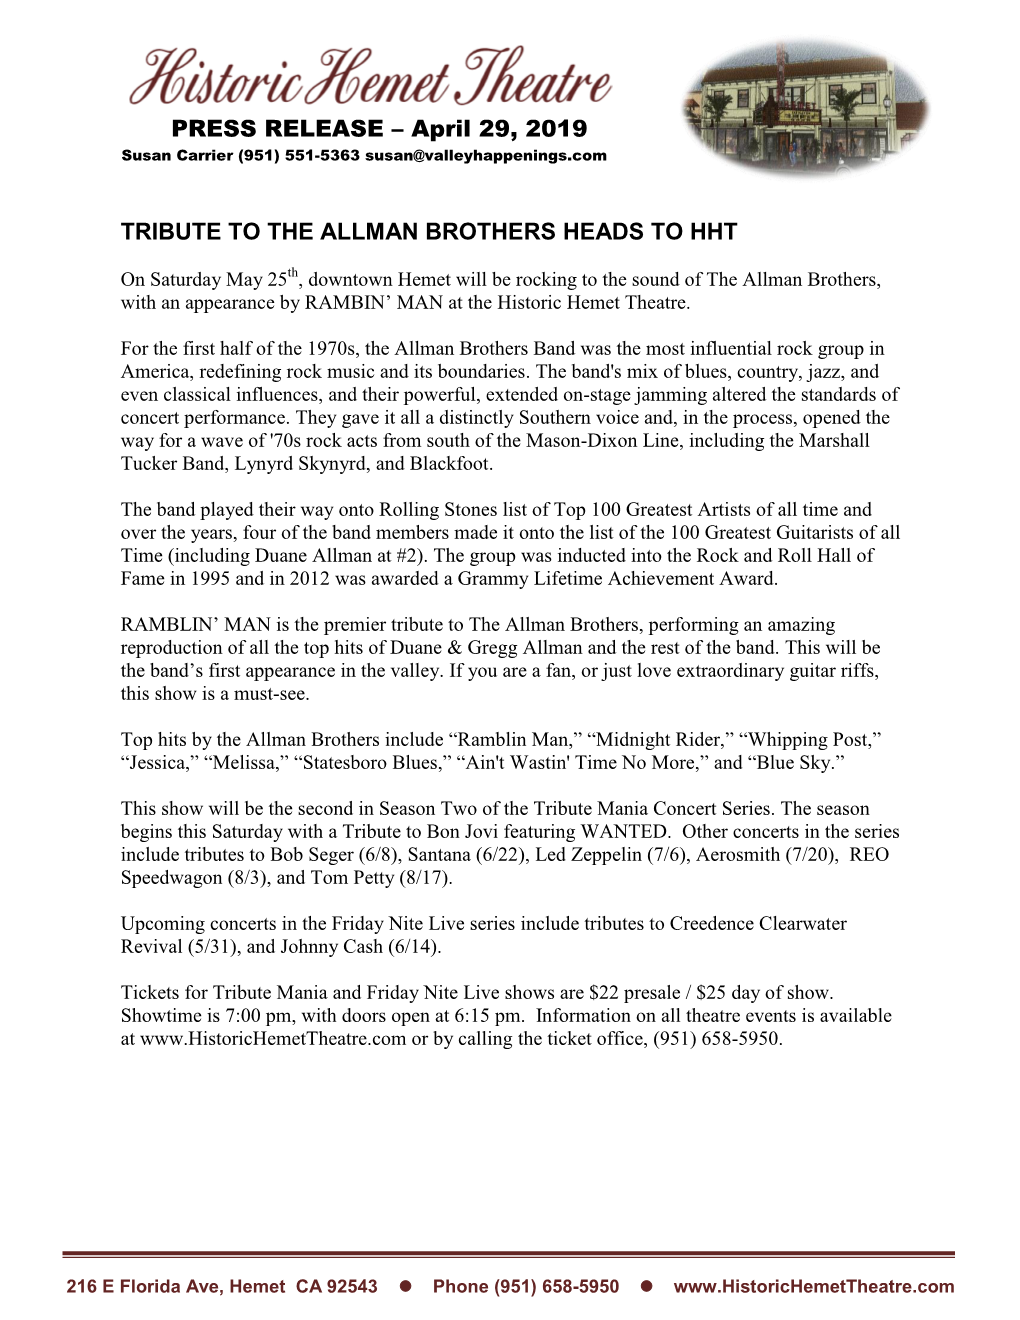 Tribute to the Allman Brothers Heads to Hht